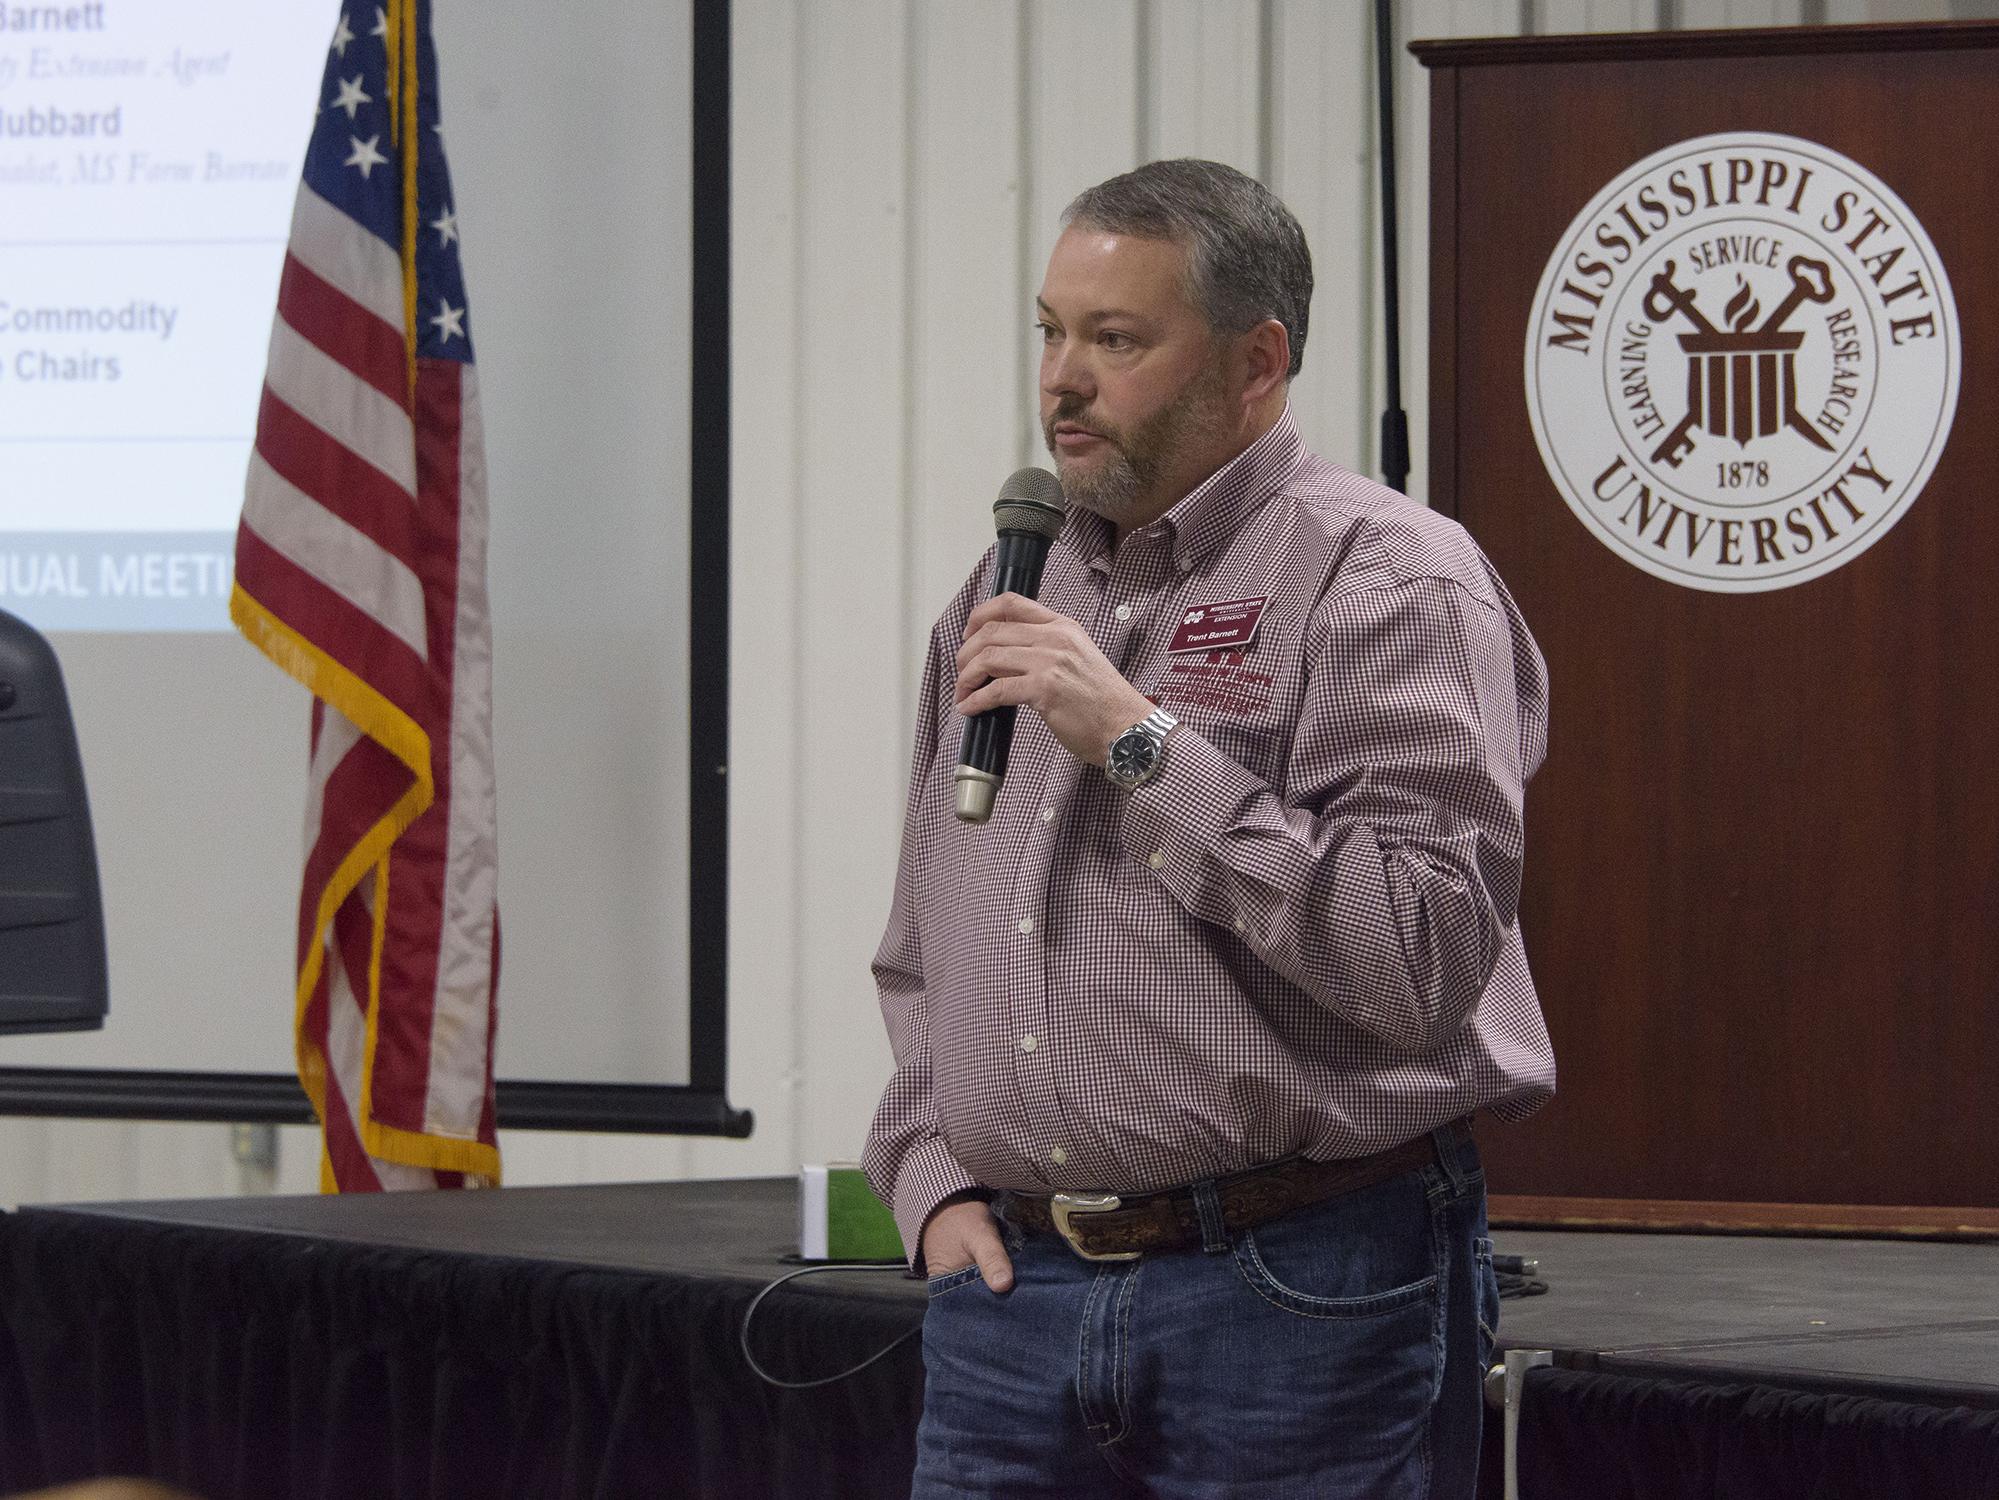 Man speaks into a handheld microphone. Background includes the Mississippi State University seal and an American flag.